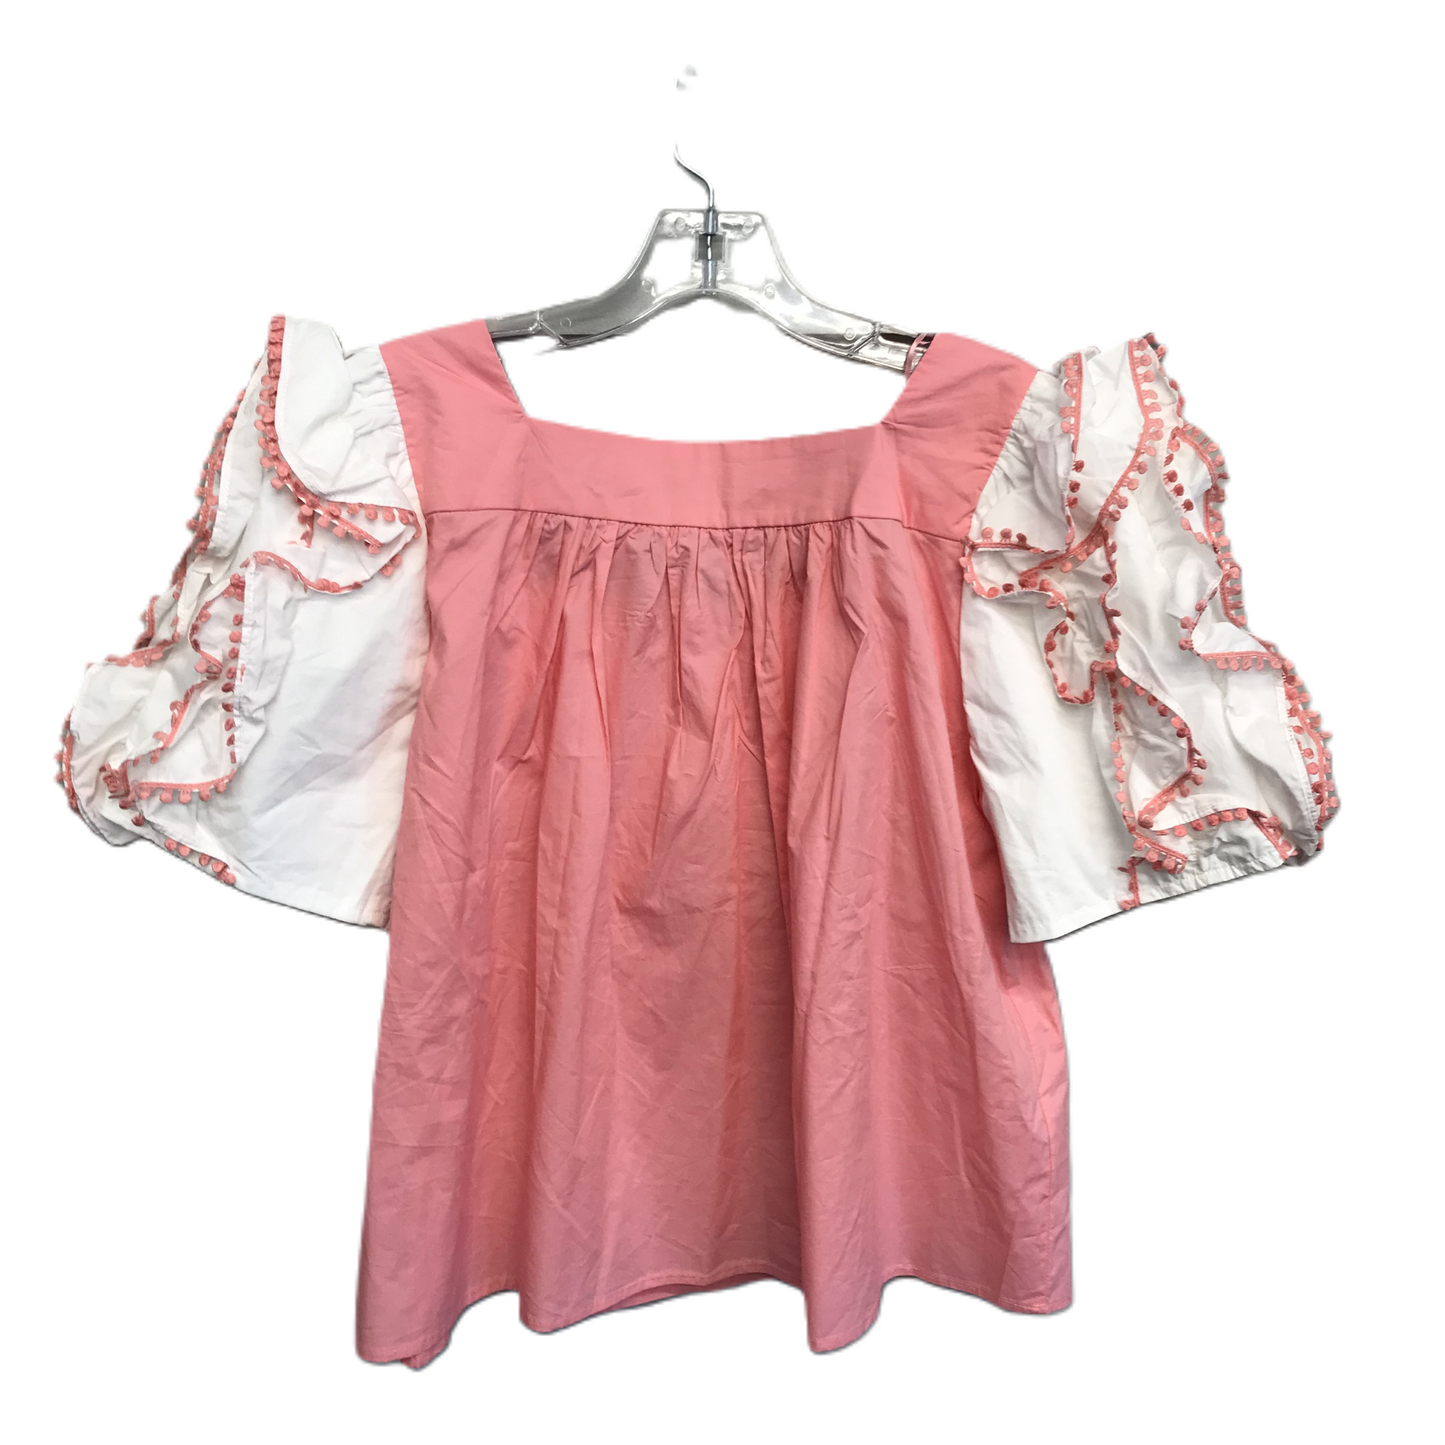 Pink Top Short Sleeve By GEEGEE, Size: L